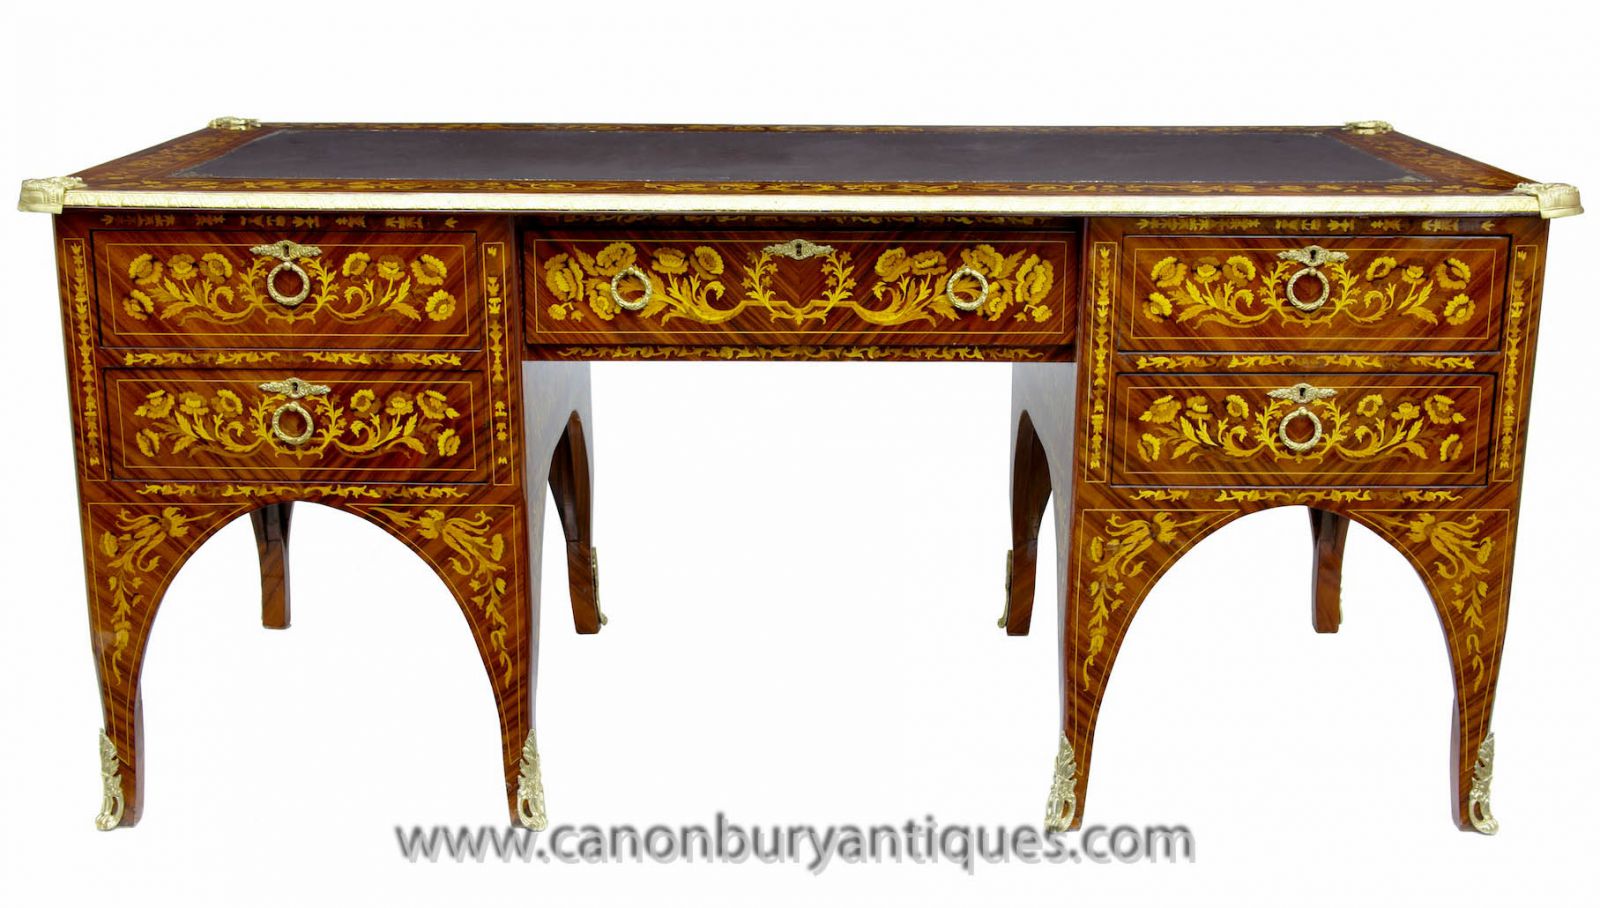 Wonderful French bureau plat with intricate marquetry inlay work